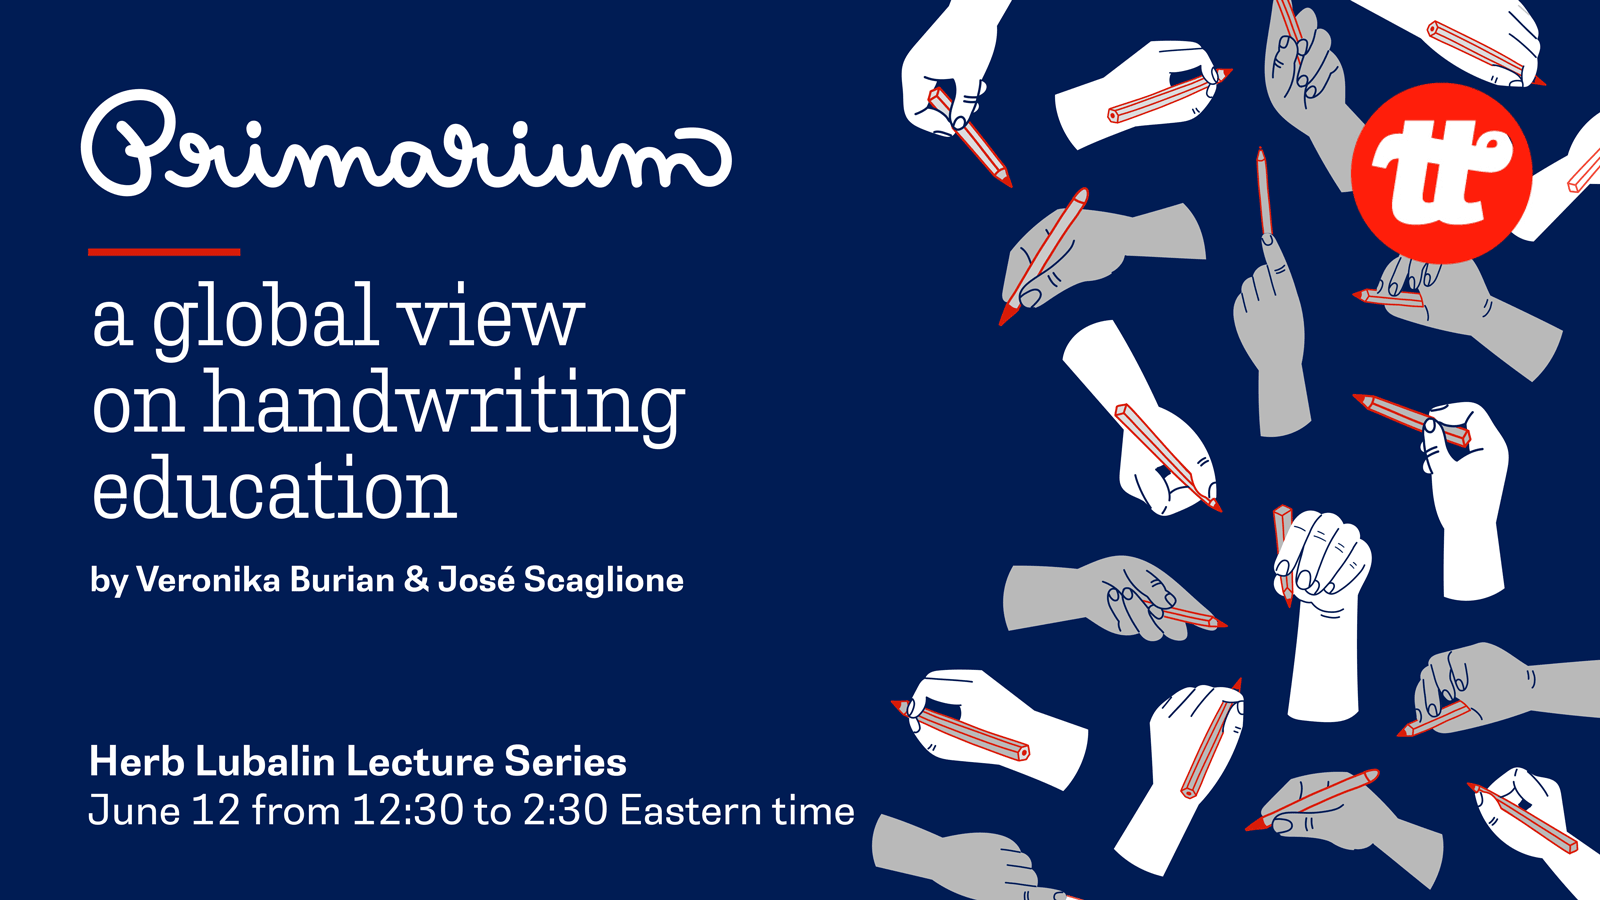 Primarium, a global view on handwriting education with TypeTogether